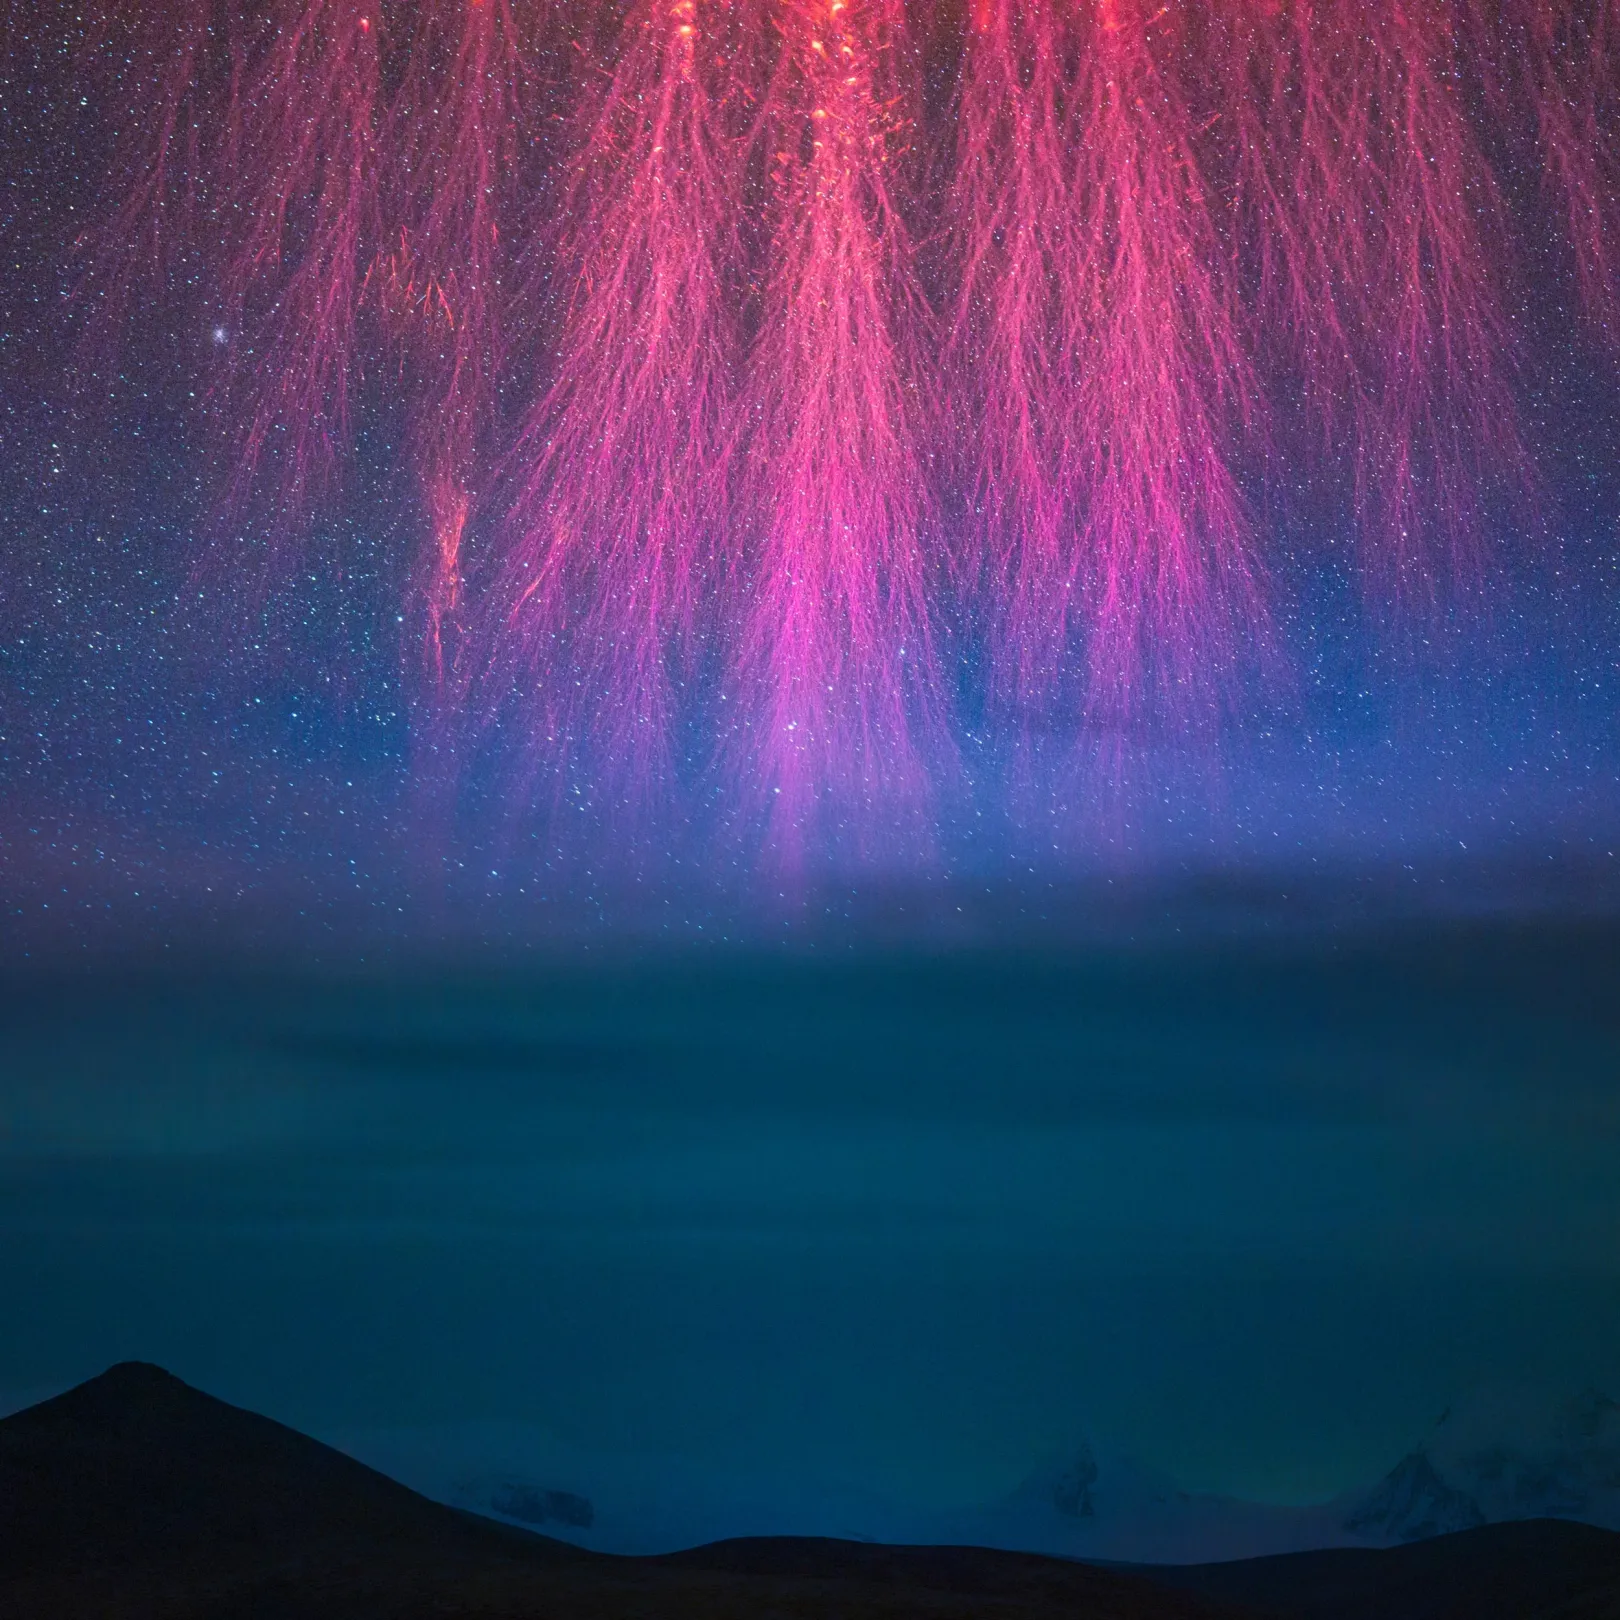 Grand Cosmic Fireworks - Photo by Angel An